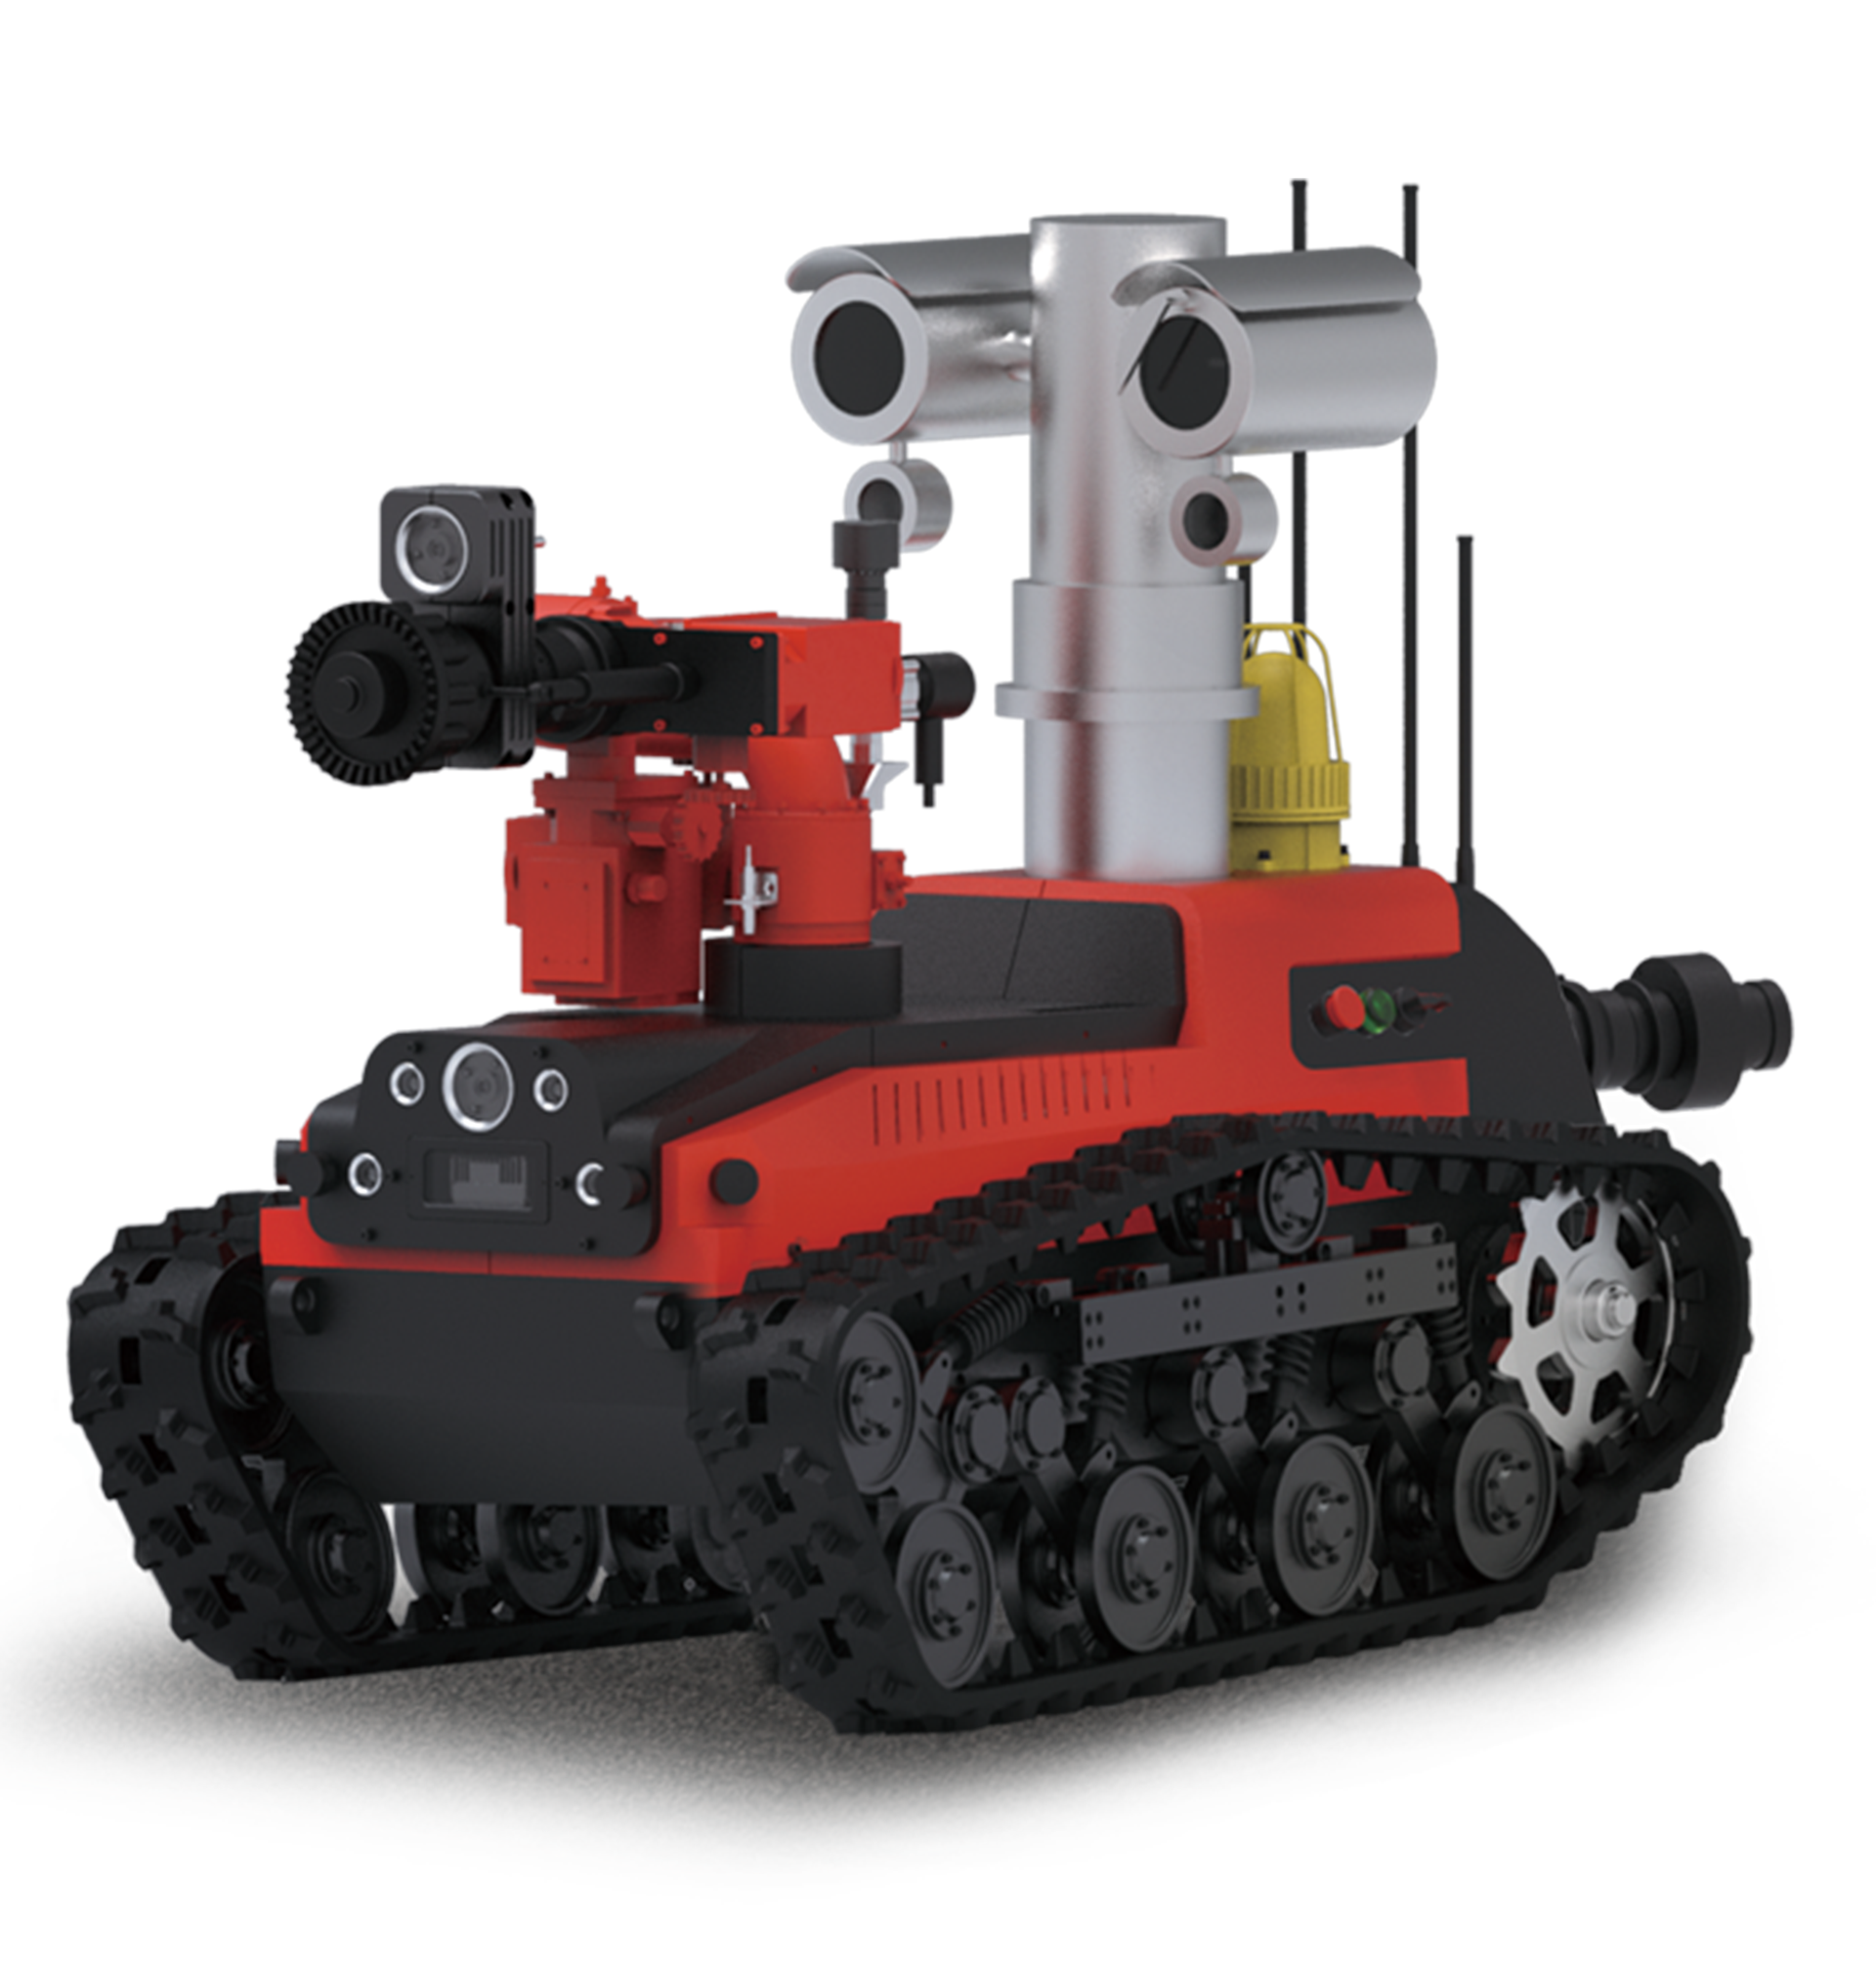 Explosion-proof fire reconnaissance and fire fighting robot